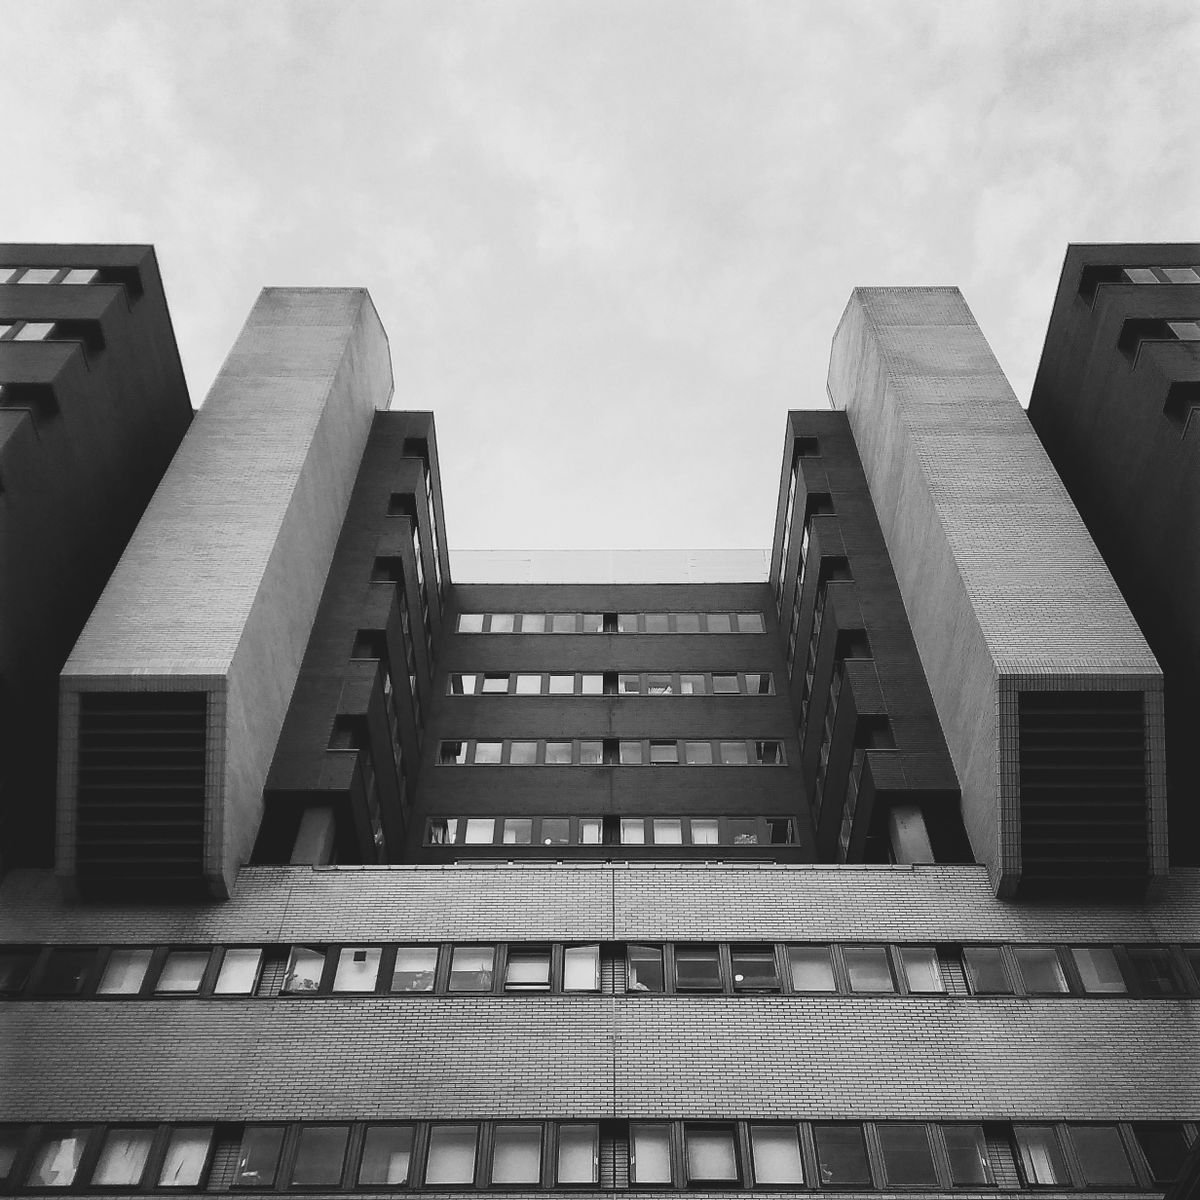 Lift Off - Black And White Brutalist Photography Print, 12x12 Inches, C-Type, Framed by Amadeus Long